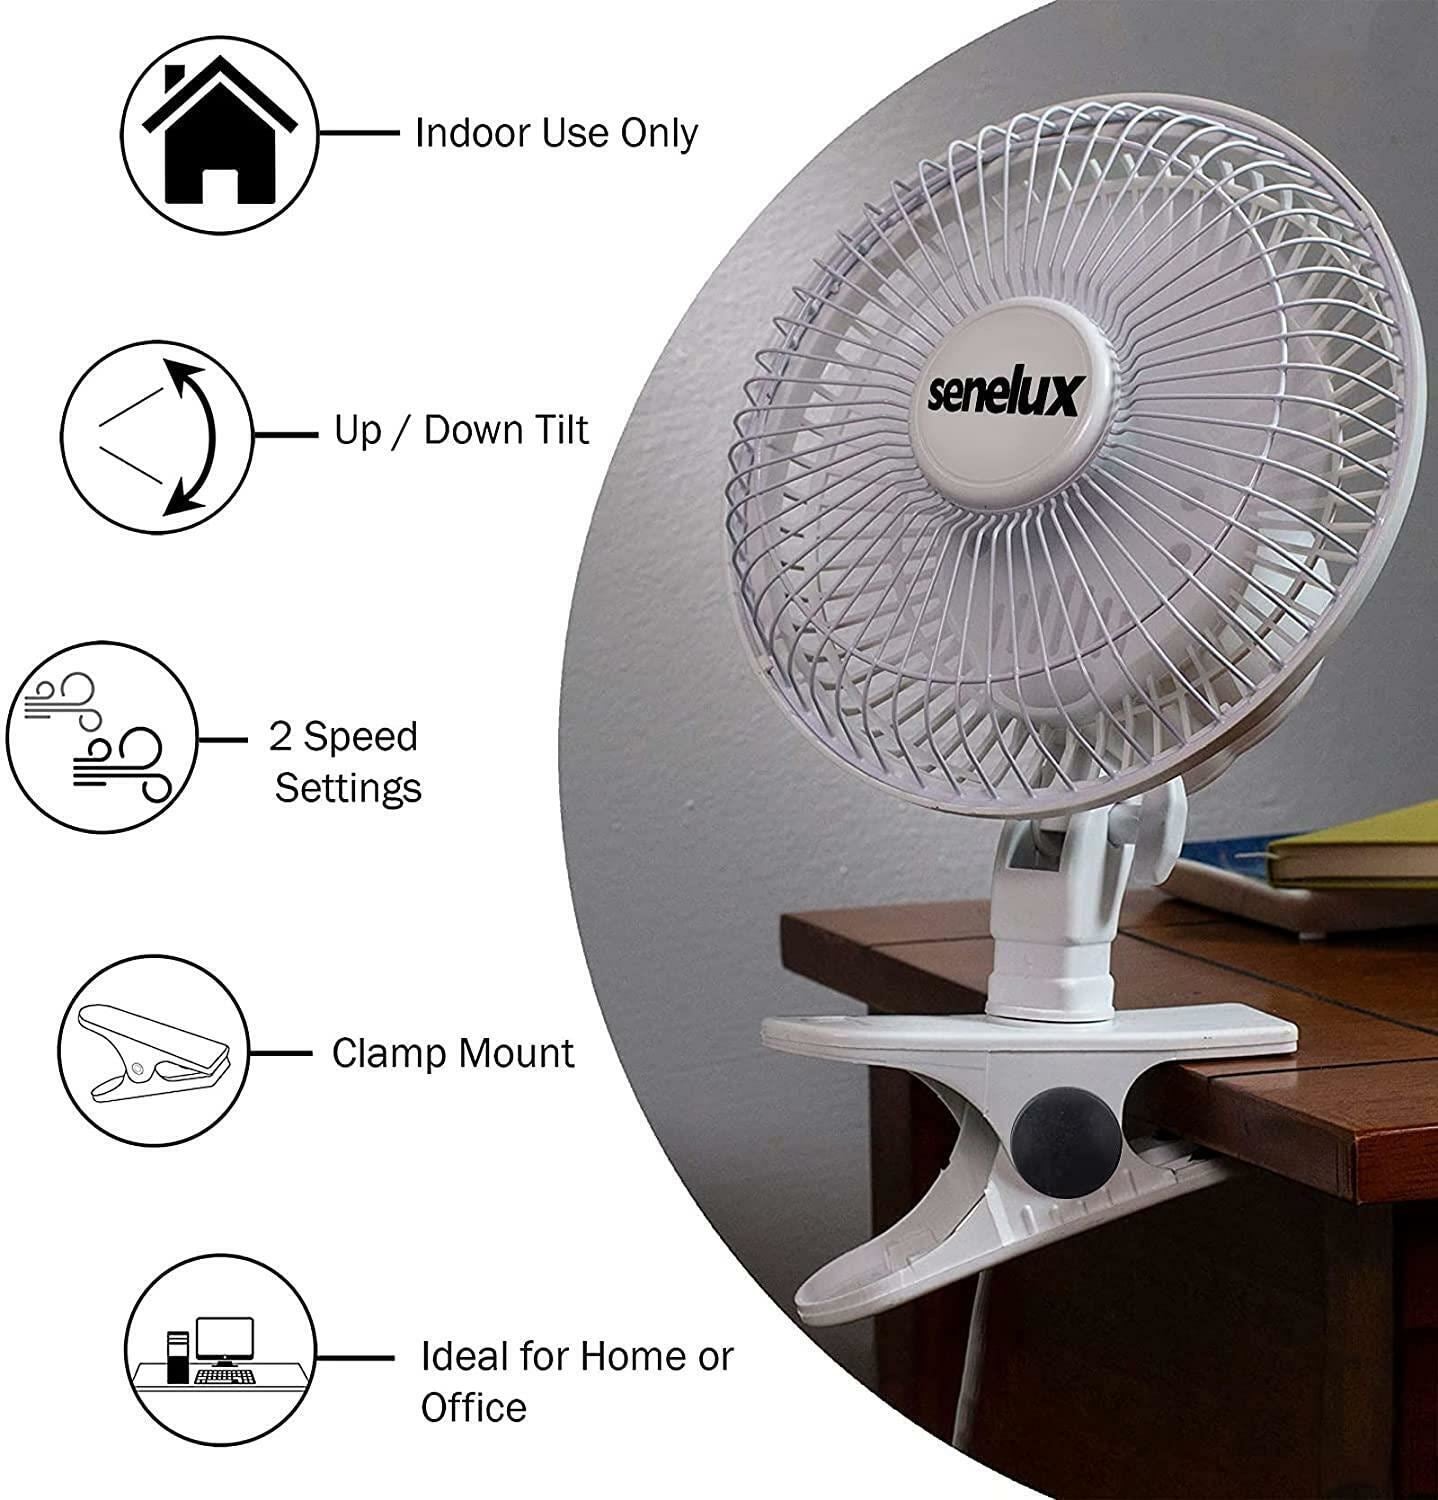 Senelux 6 inch Clip on Fan 2 Speeds Quiet Portable Air Cooling Small Electric